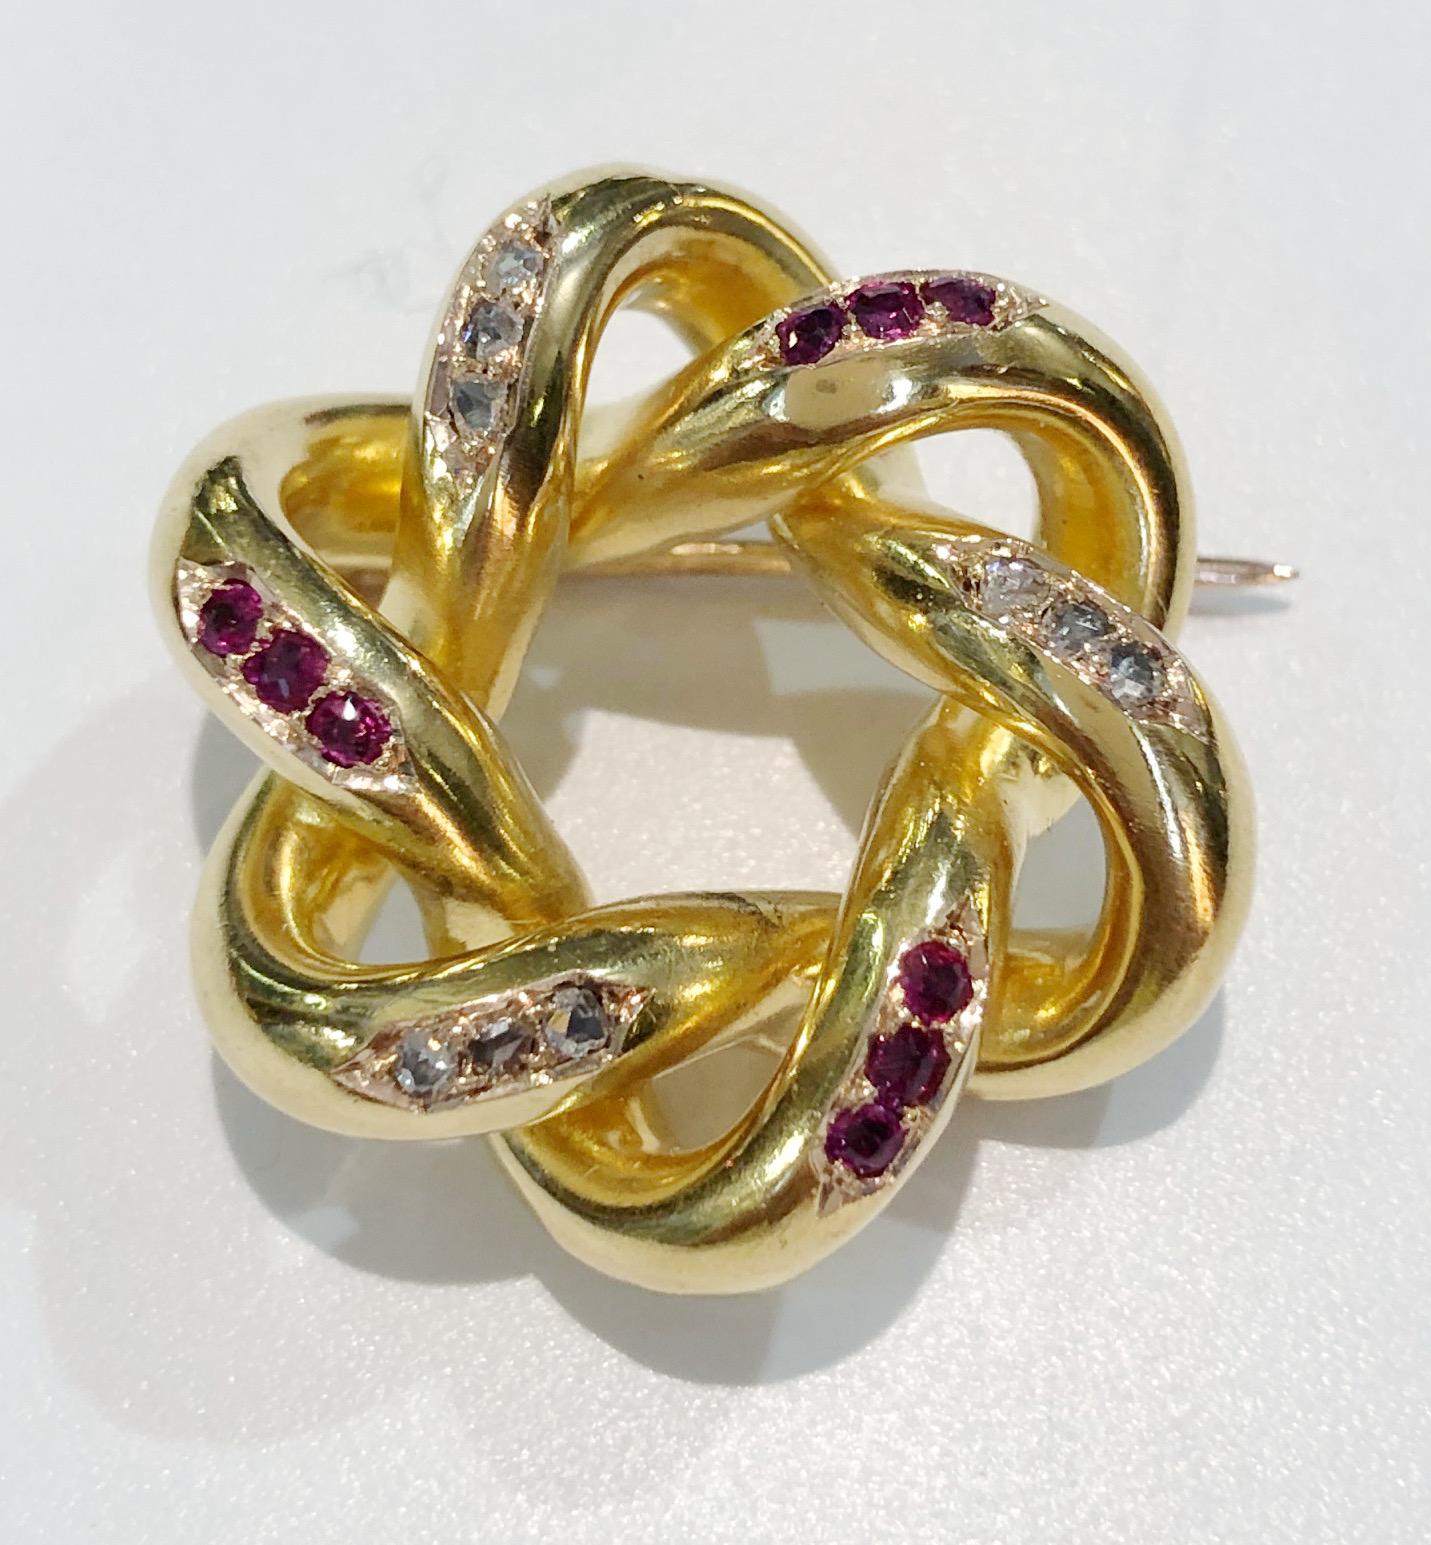 Vintage 18 karat yellow gold brooch designed as a knot, with rubies and diamonds, Italy late 1800s 
Diameter 3cm